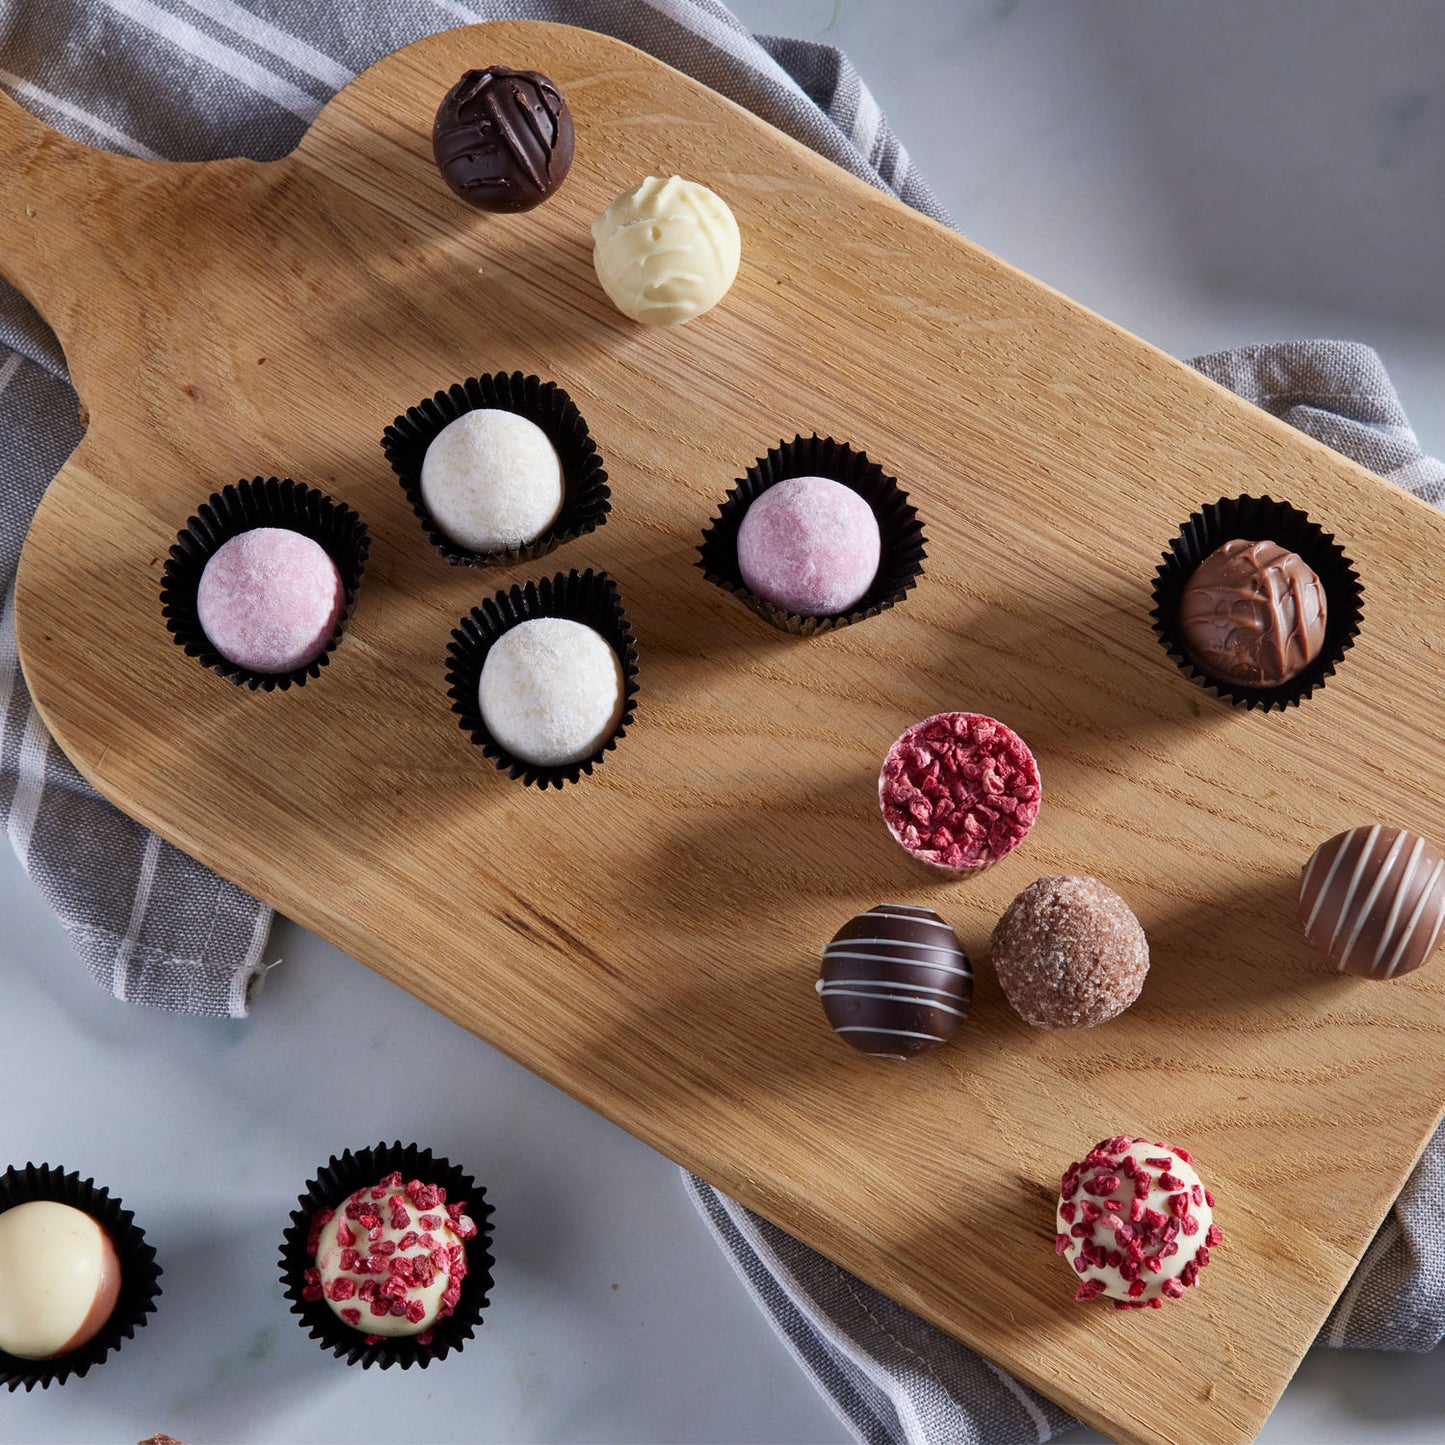 Luxurious White Chocolate Raspberry and Marc de Champagne Truffle Bulk Box, finished with freeze dried raspberry pieces